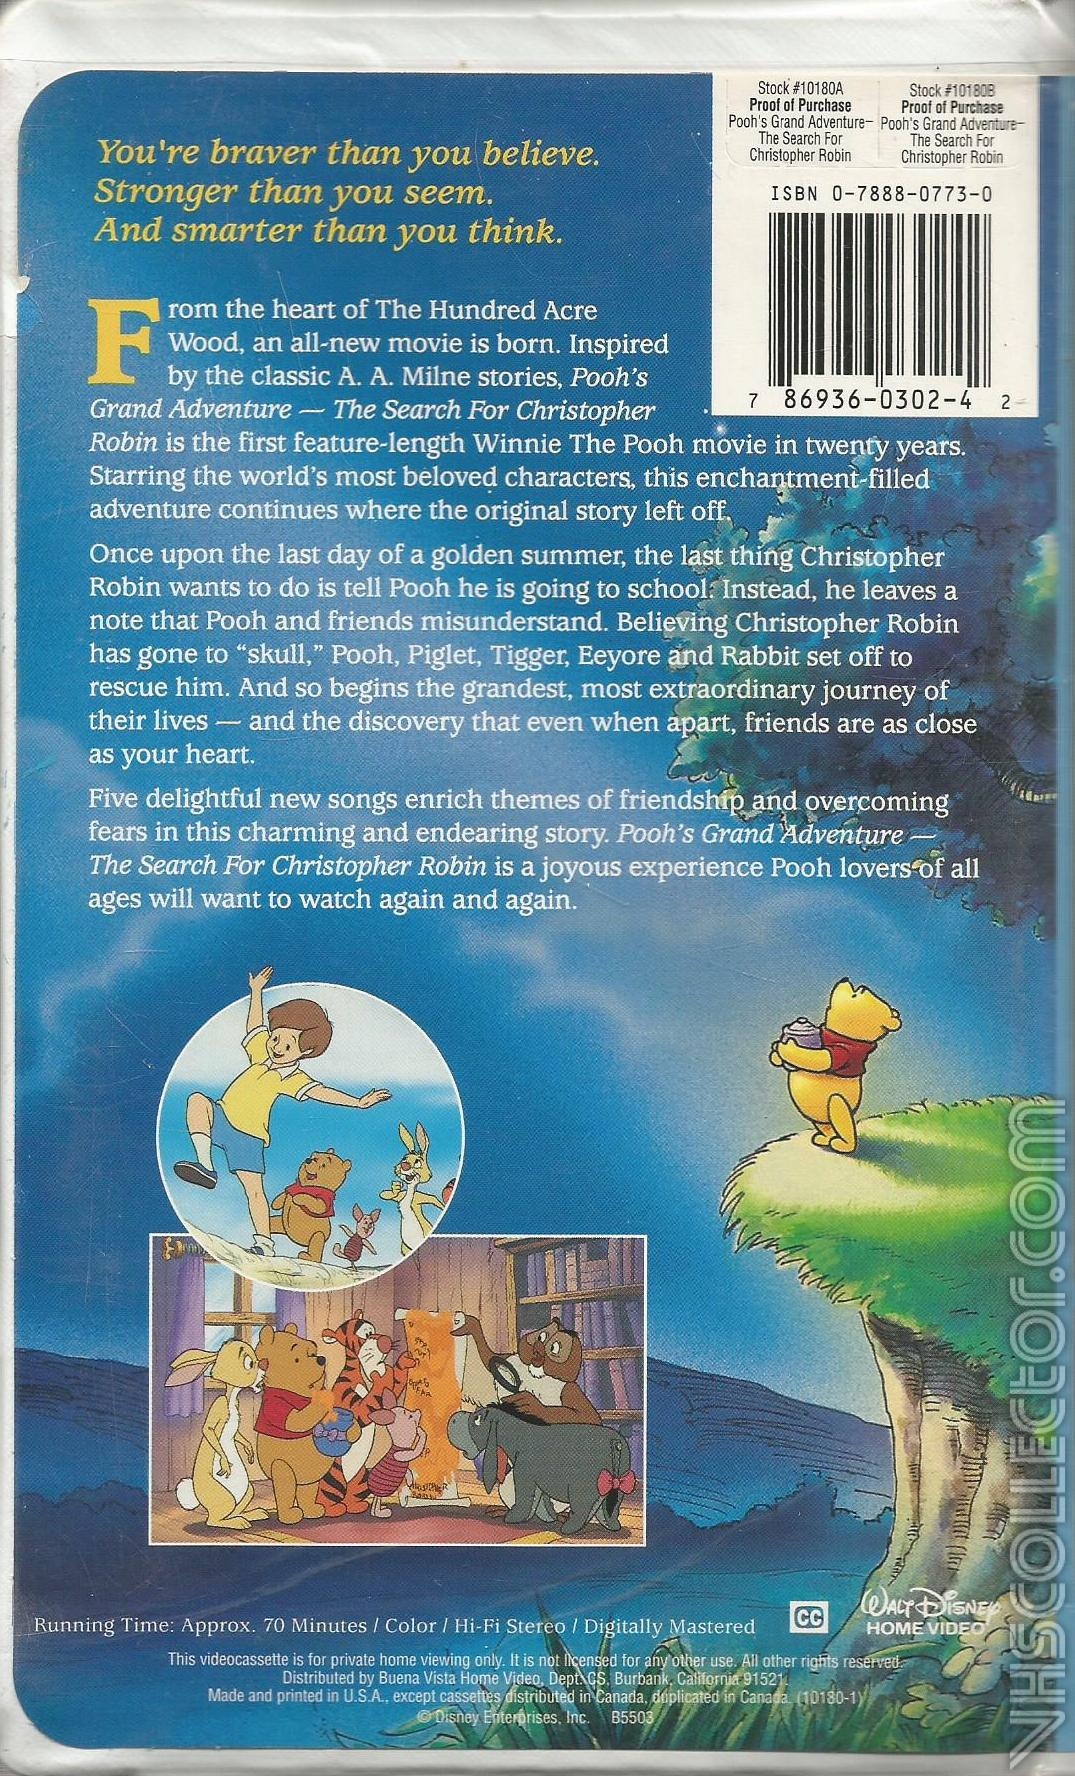 Pooh's Grand Adventure: The Search For Christopher Robin | VHSCollector.com